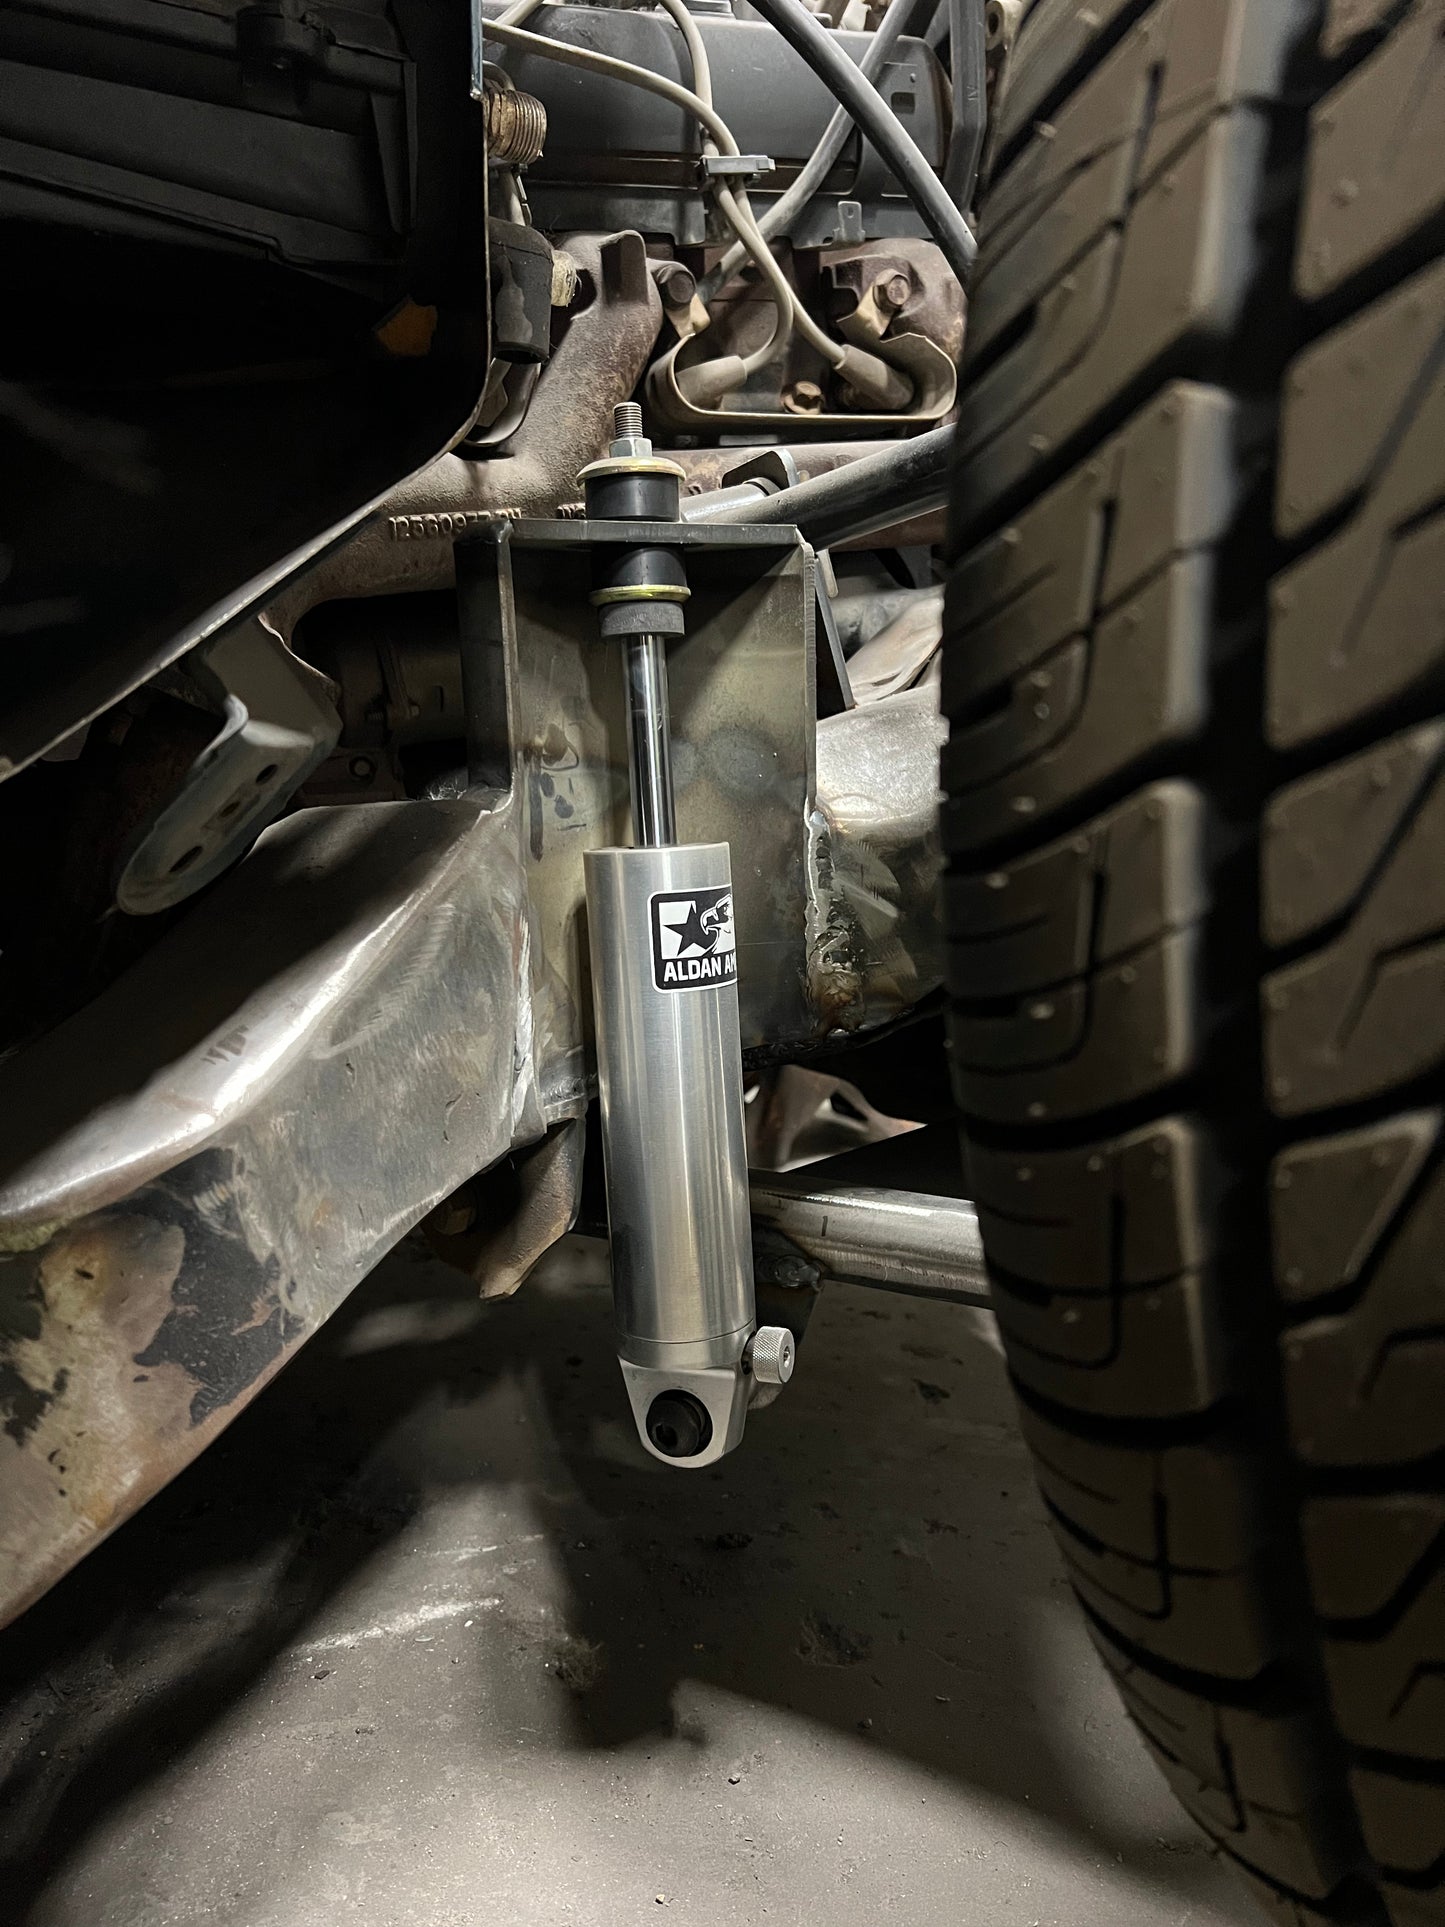 88-98 c1500 Front shock clearance kit